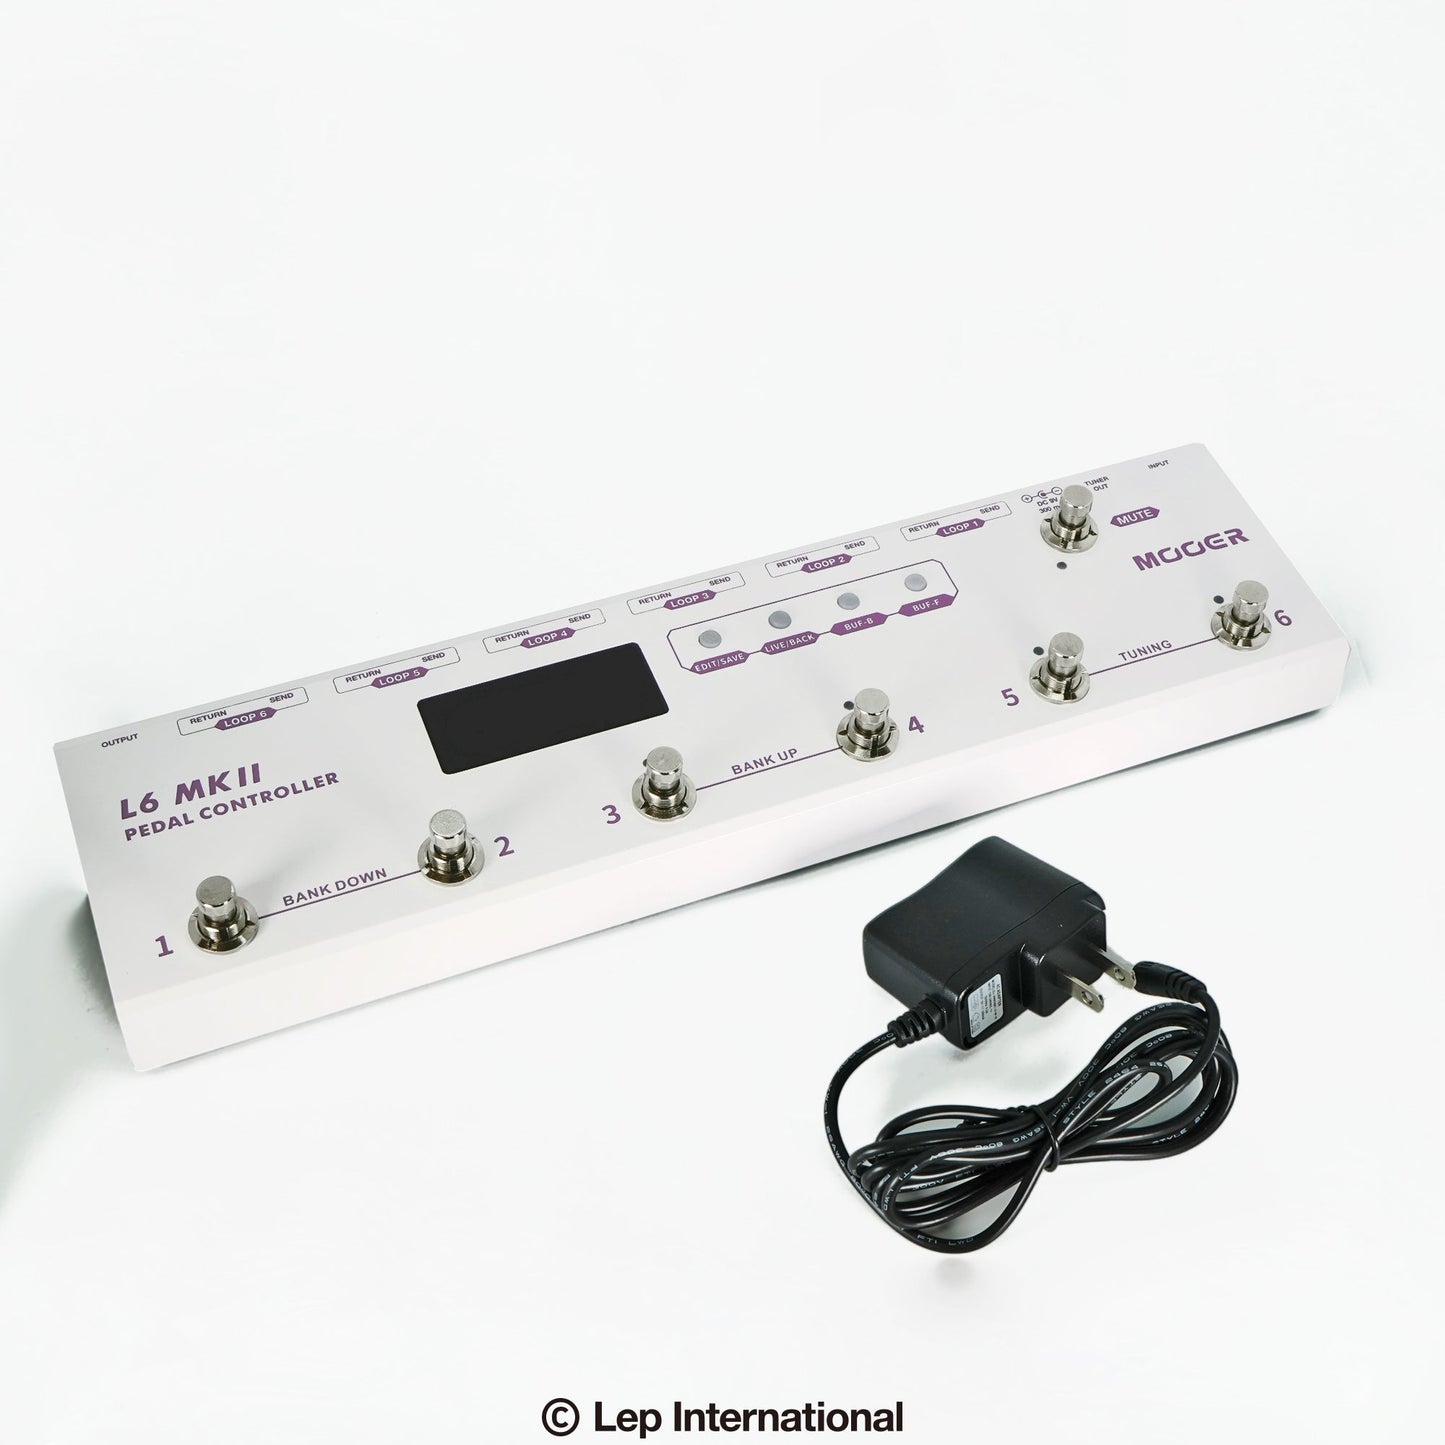 Mooer Pedal Controller L6 MkII